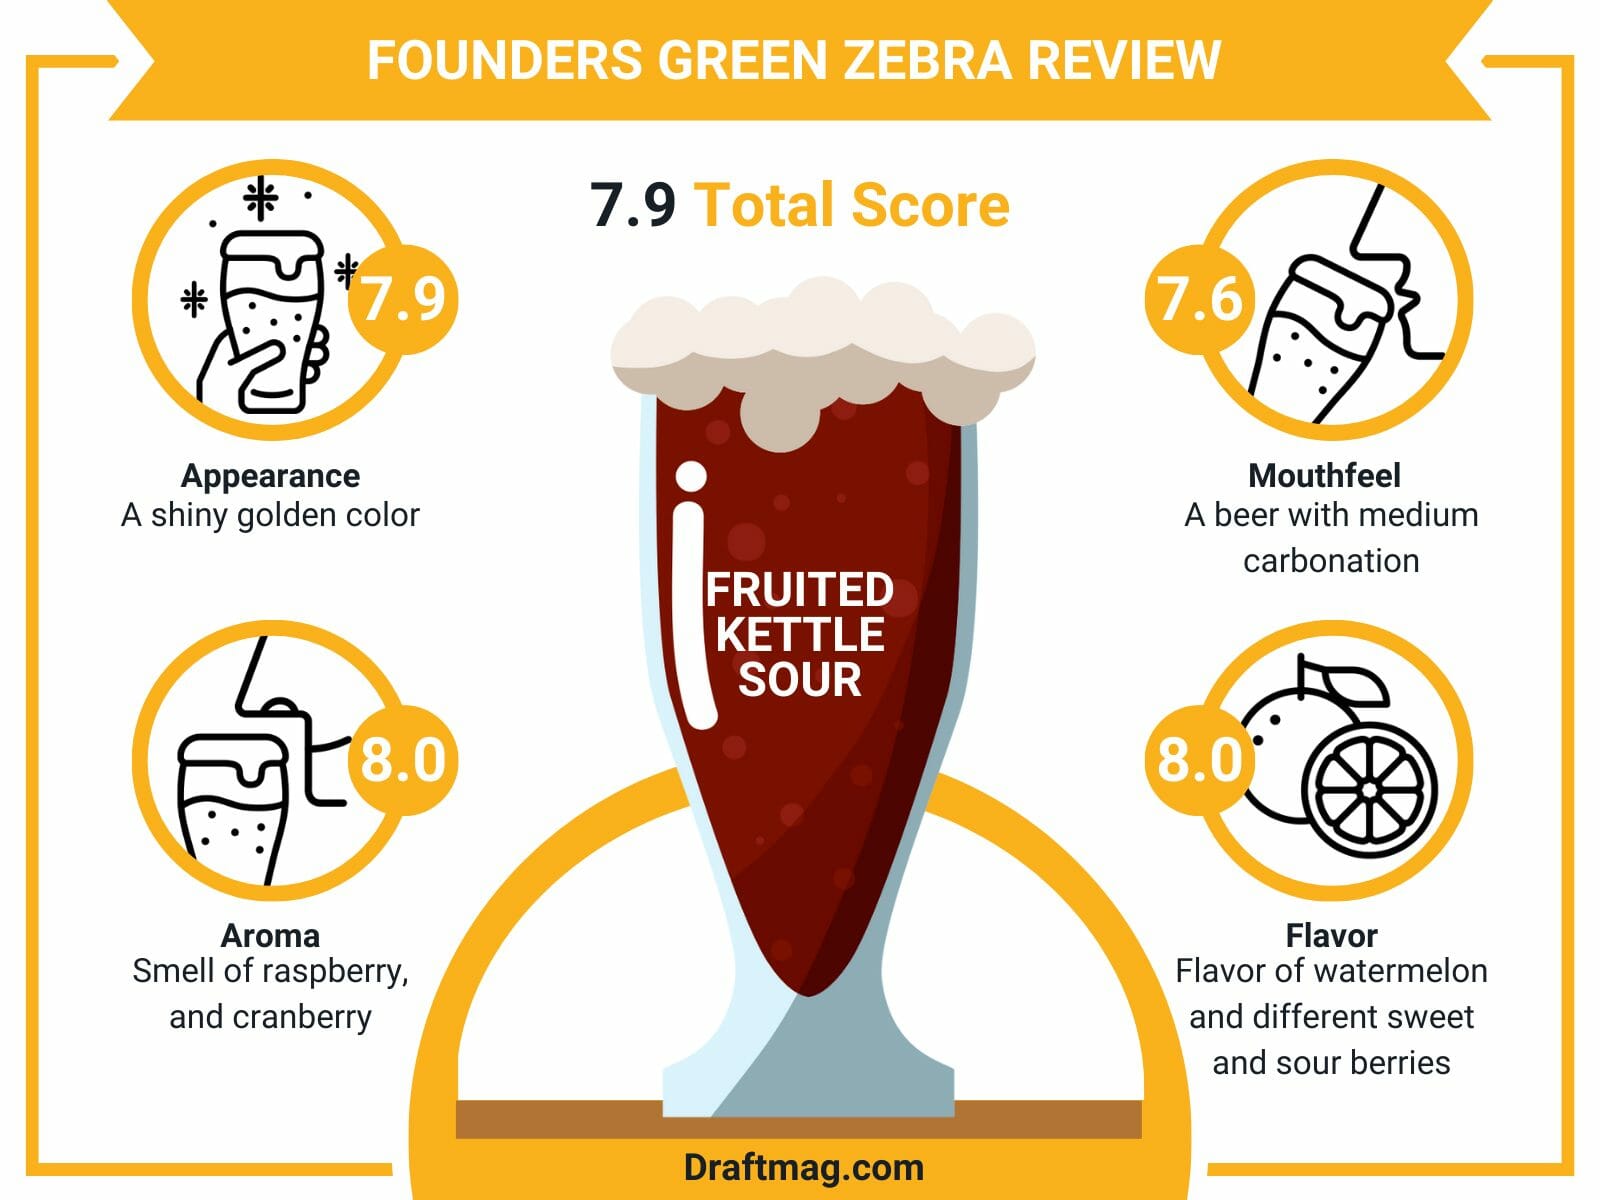 Founders Green Zebra Review Infographic